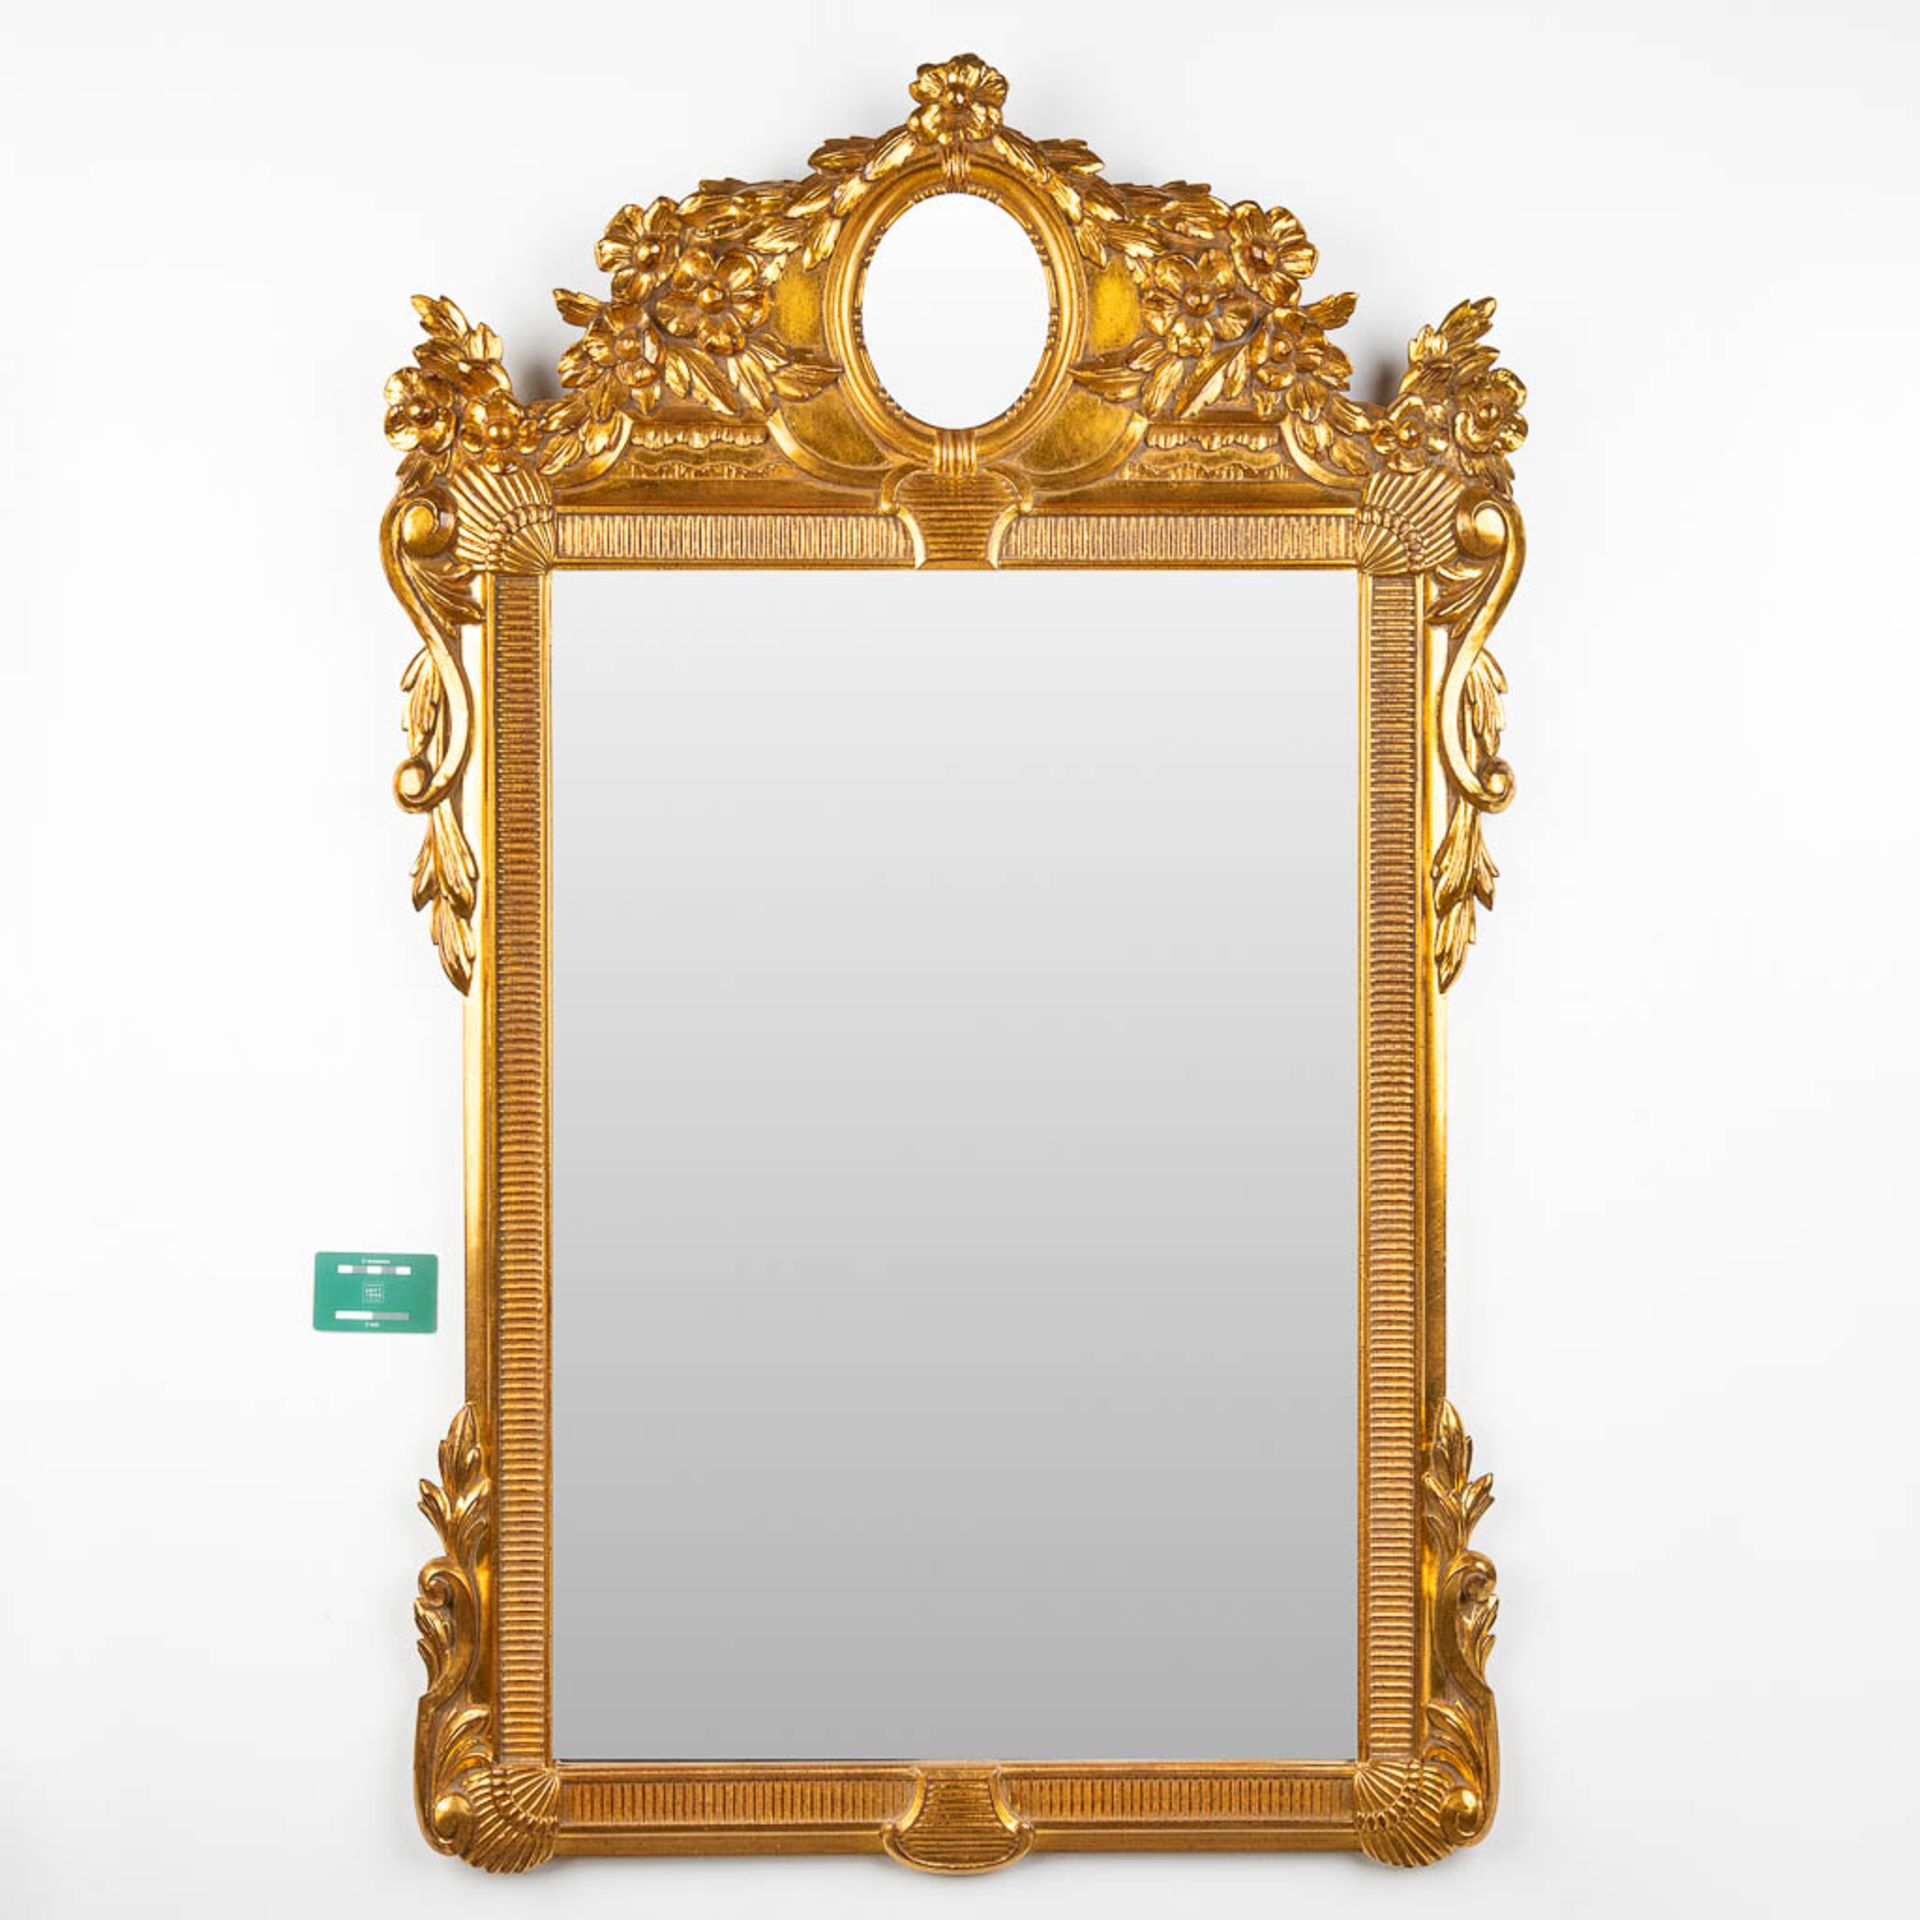 Deknudt, a gold-plated mirror. 20th C. (W:76 x H:124 cm) - Image 2 of 7